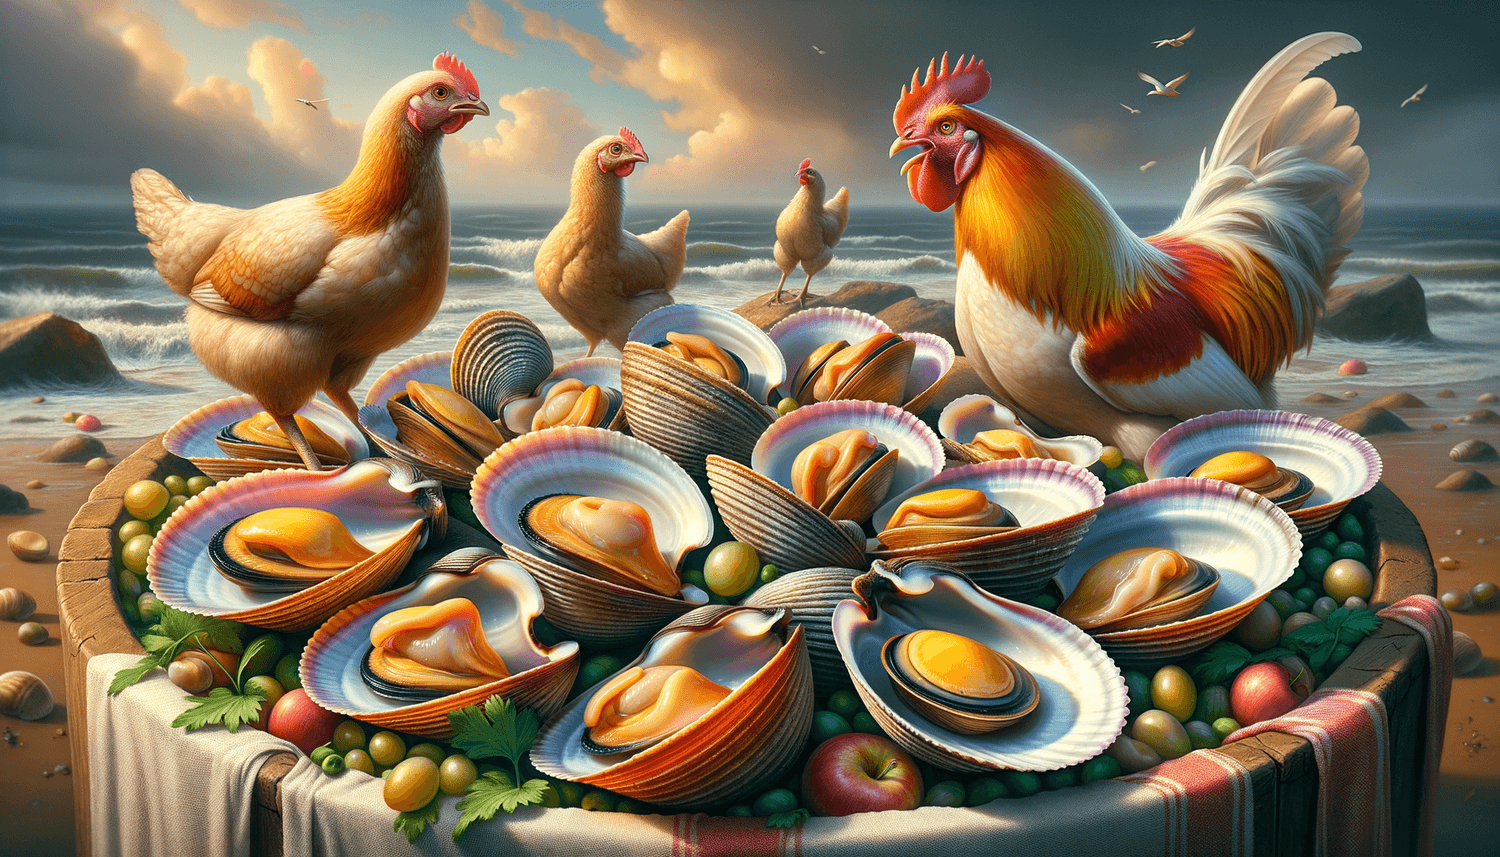 Can Chickens Eat Clams?